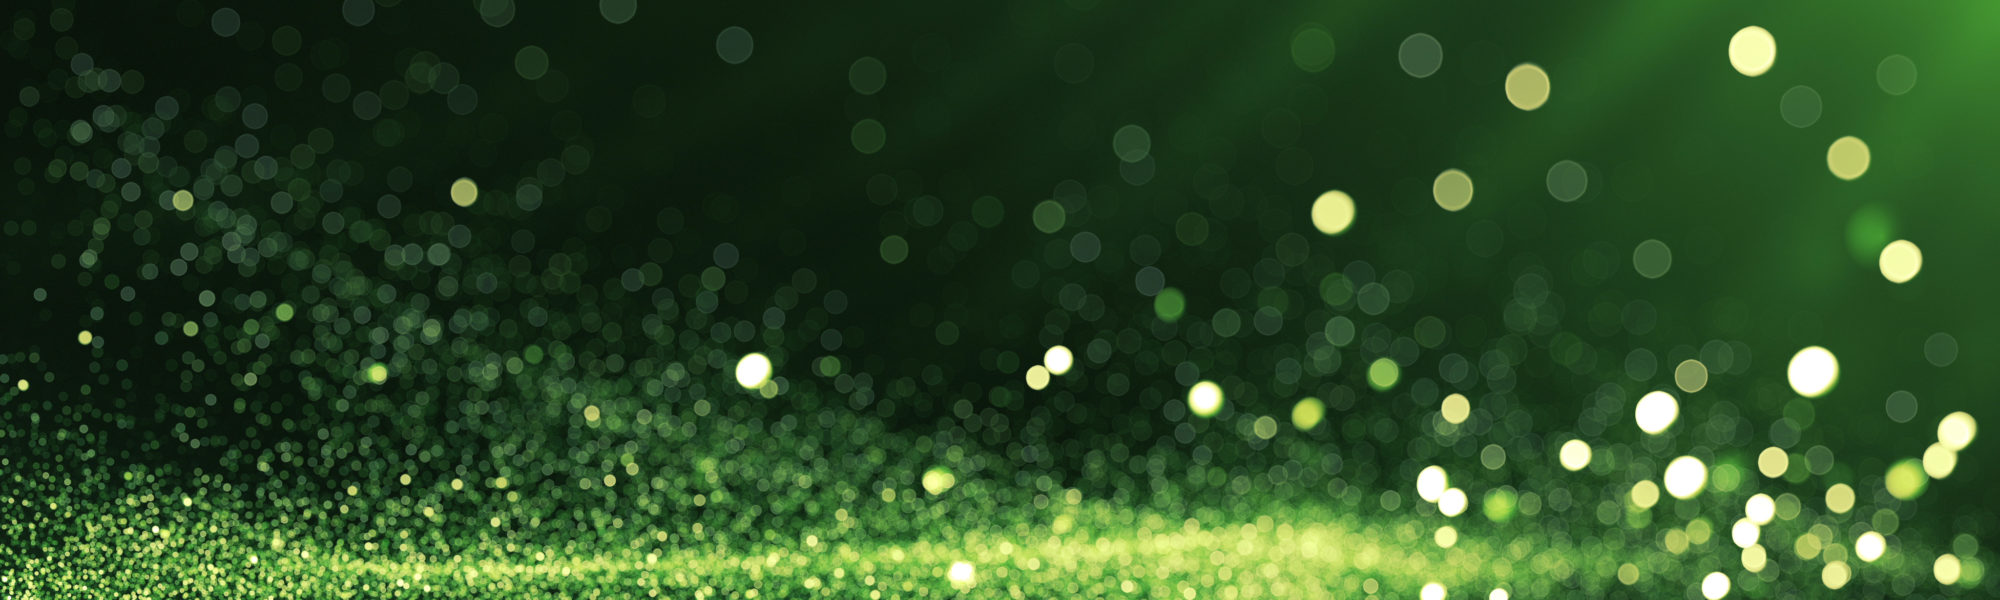 Green Defocused Particles Background